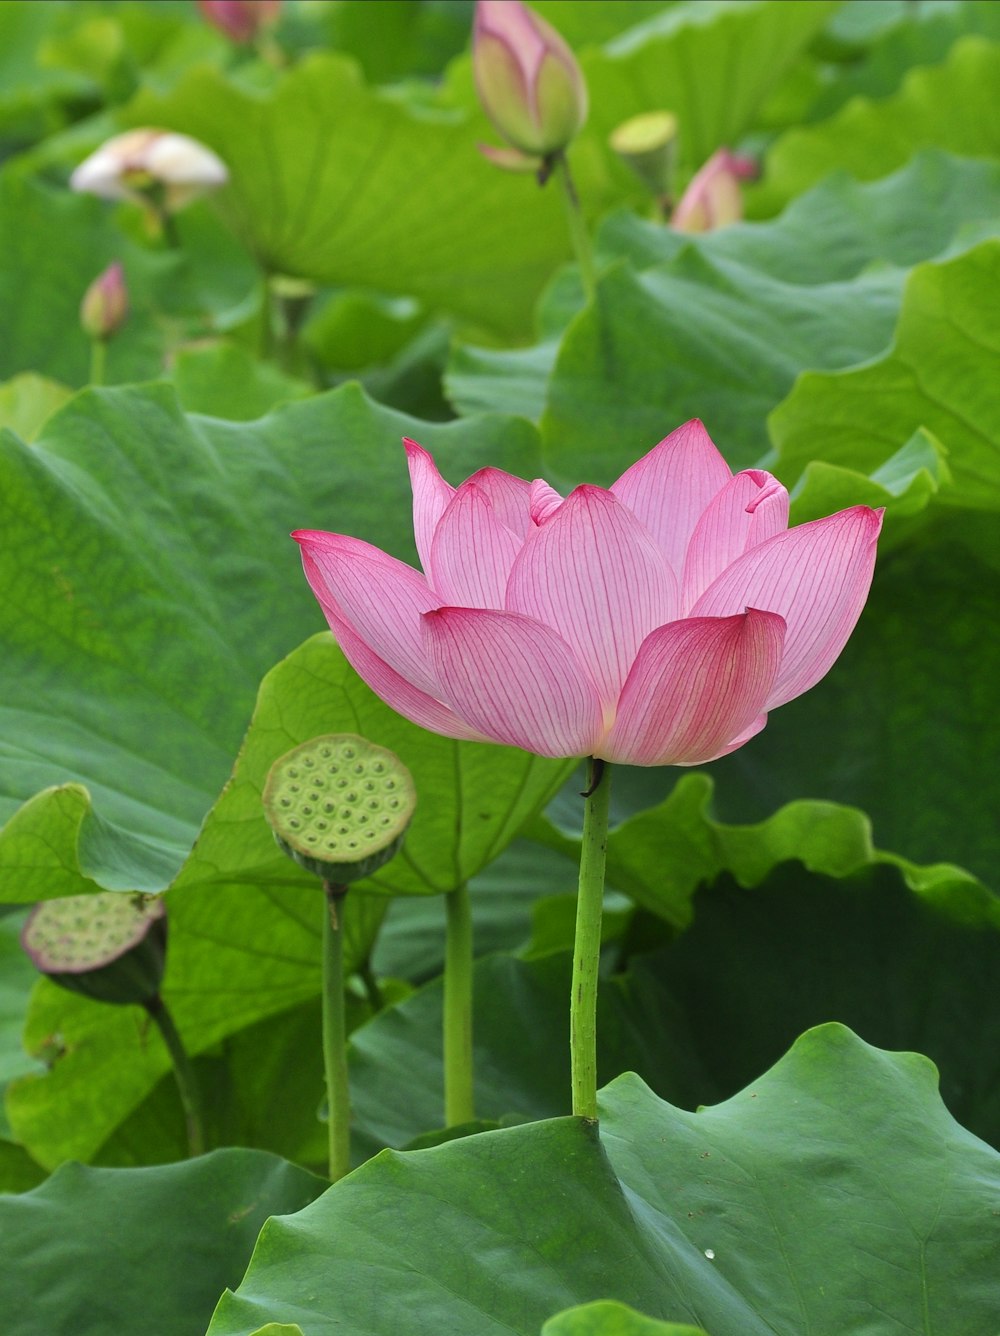 a pink lotus flower in the middle of a field of green leaves